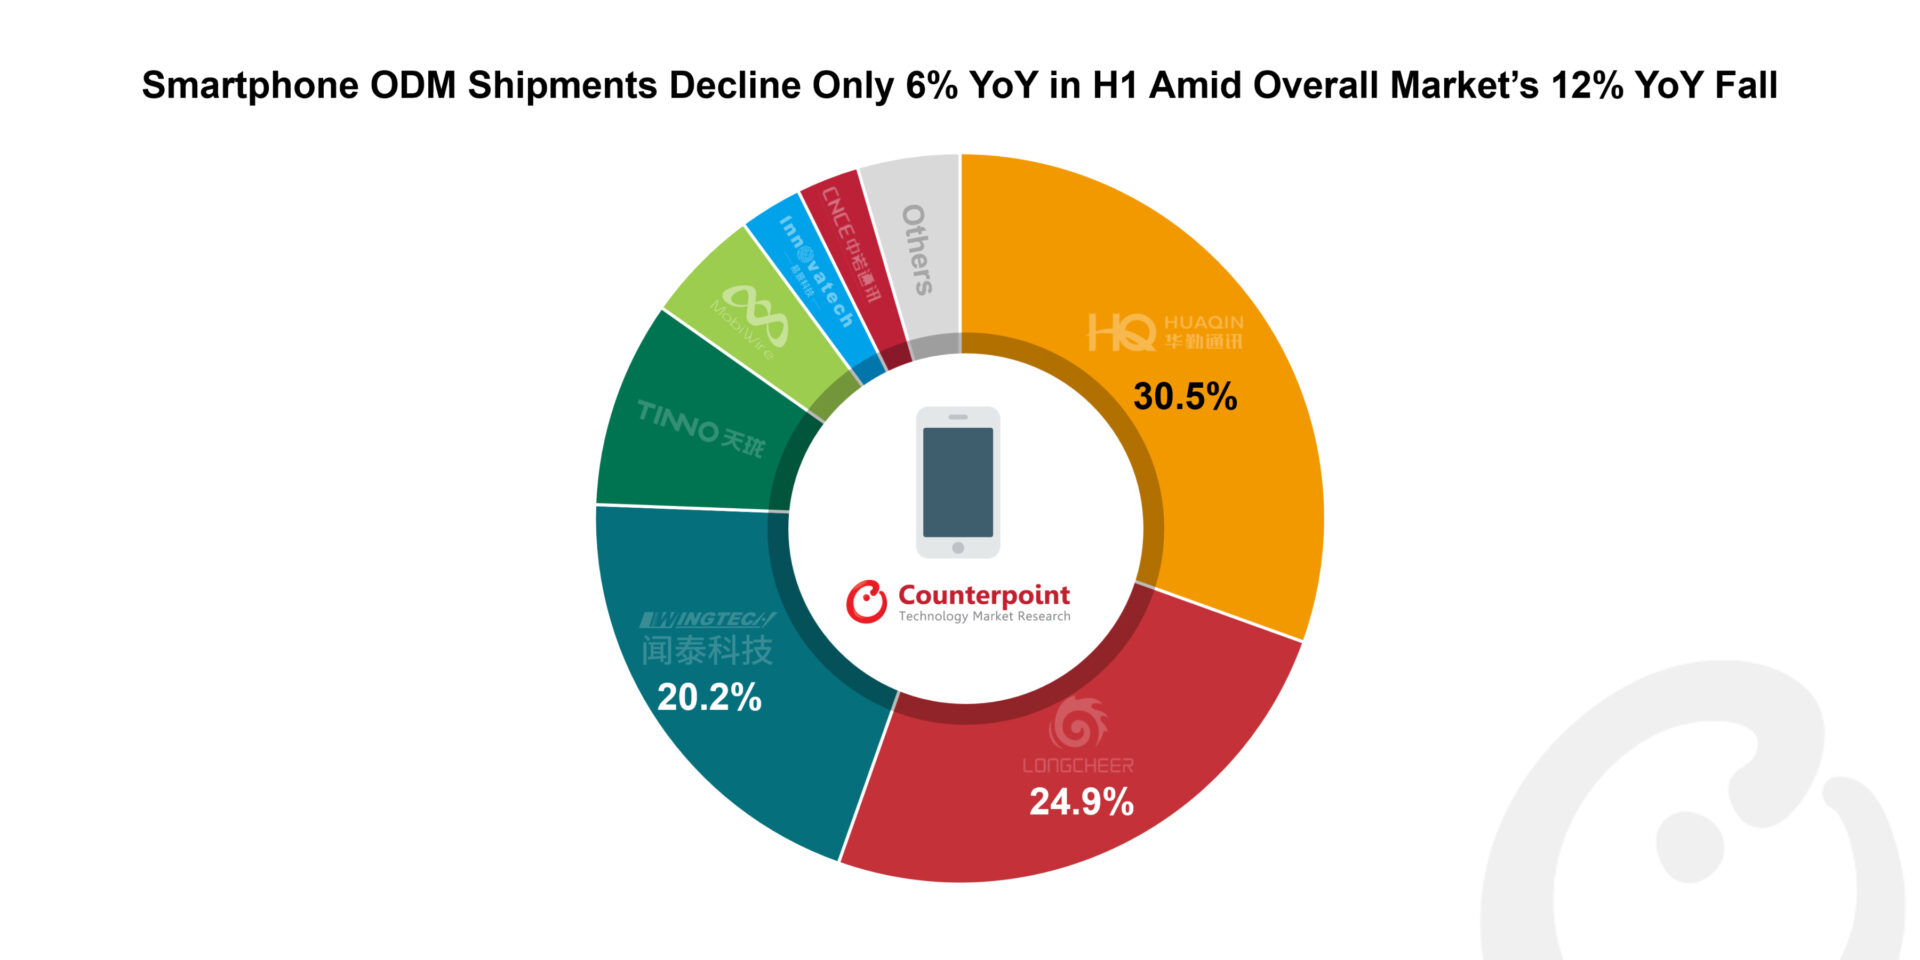 Smartphone ODM Shipments Decline Only 6% YoY in H1 Amid Overall Market’s 12% YoY Fall